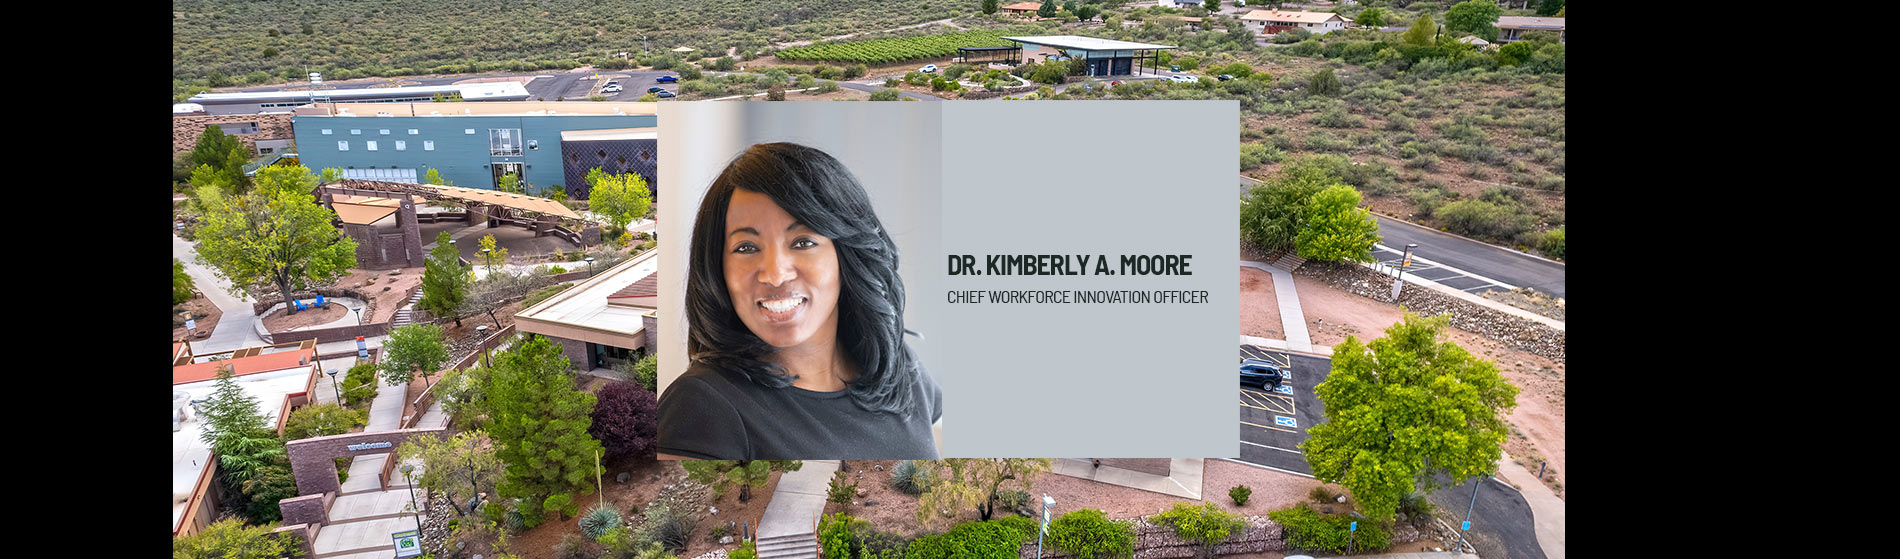 Dr Kimberly Moore